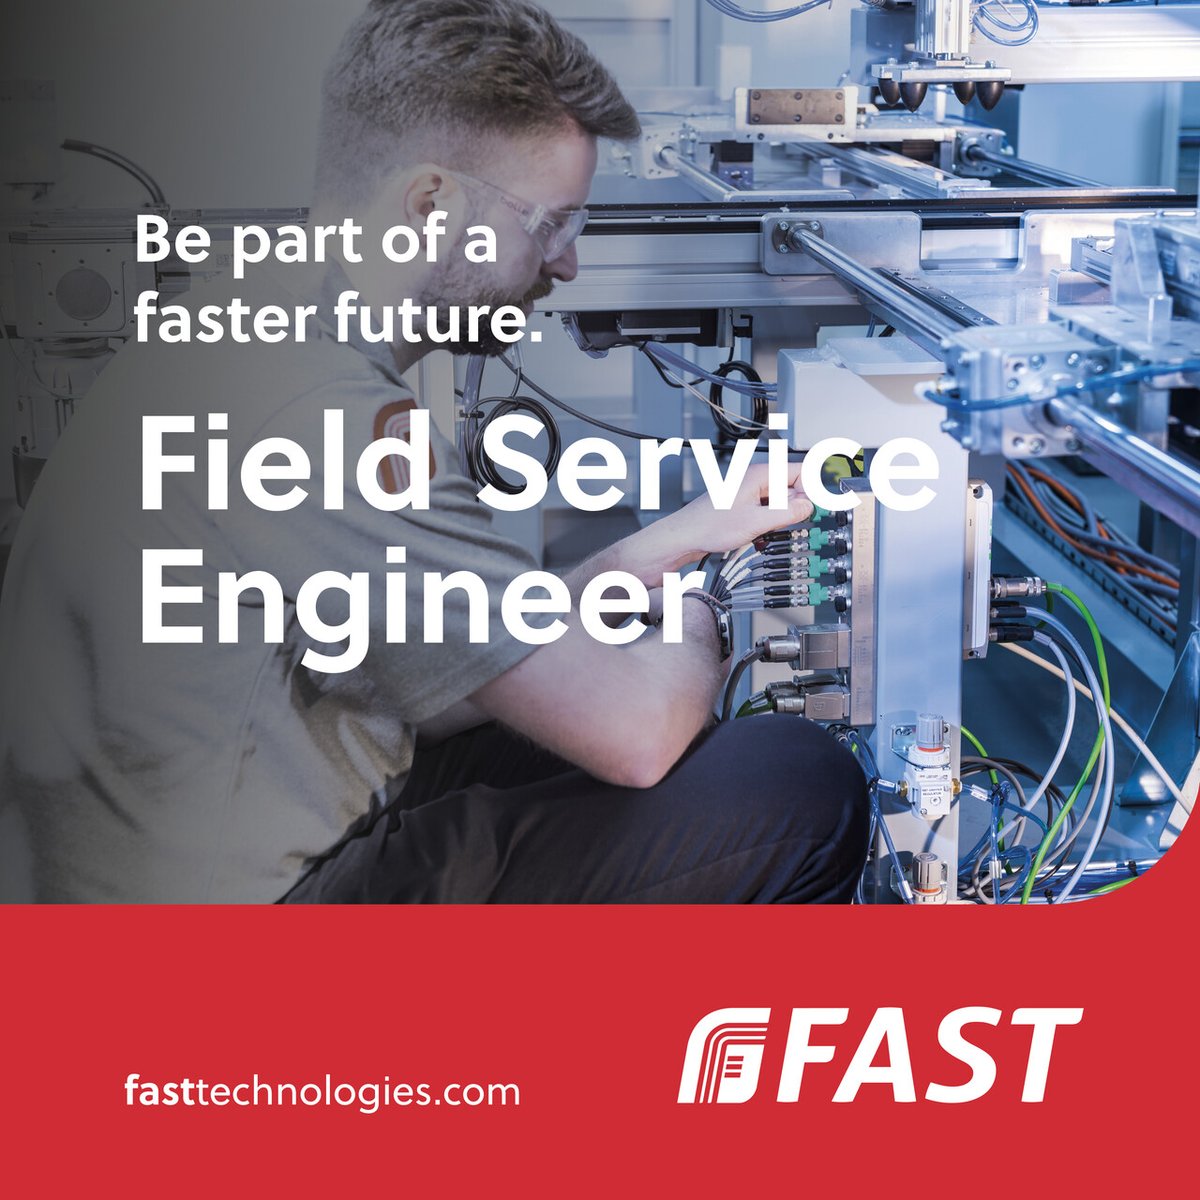 🔊 We are hiring! FAST are recruiting for a Field Service Engineer.

📱 To view the full job description, and apply online, please visit our website > bit.ly/3WKGZ8T

#TeamFAST #JobVacancy #FieldServiceEngineer #Engineer